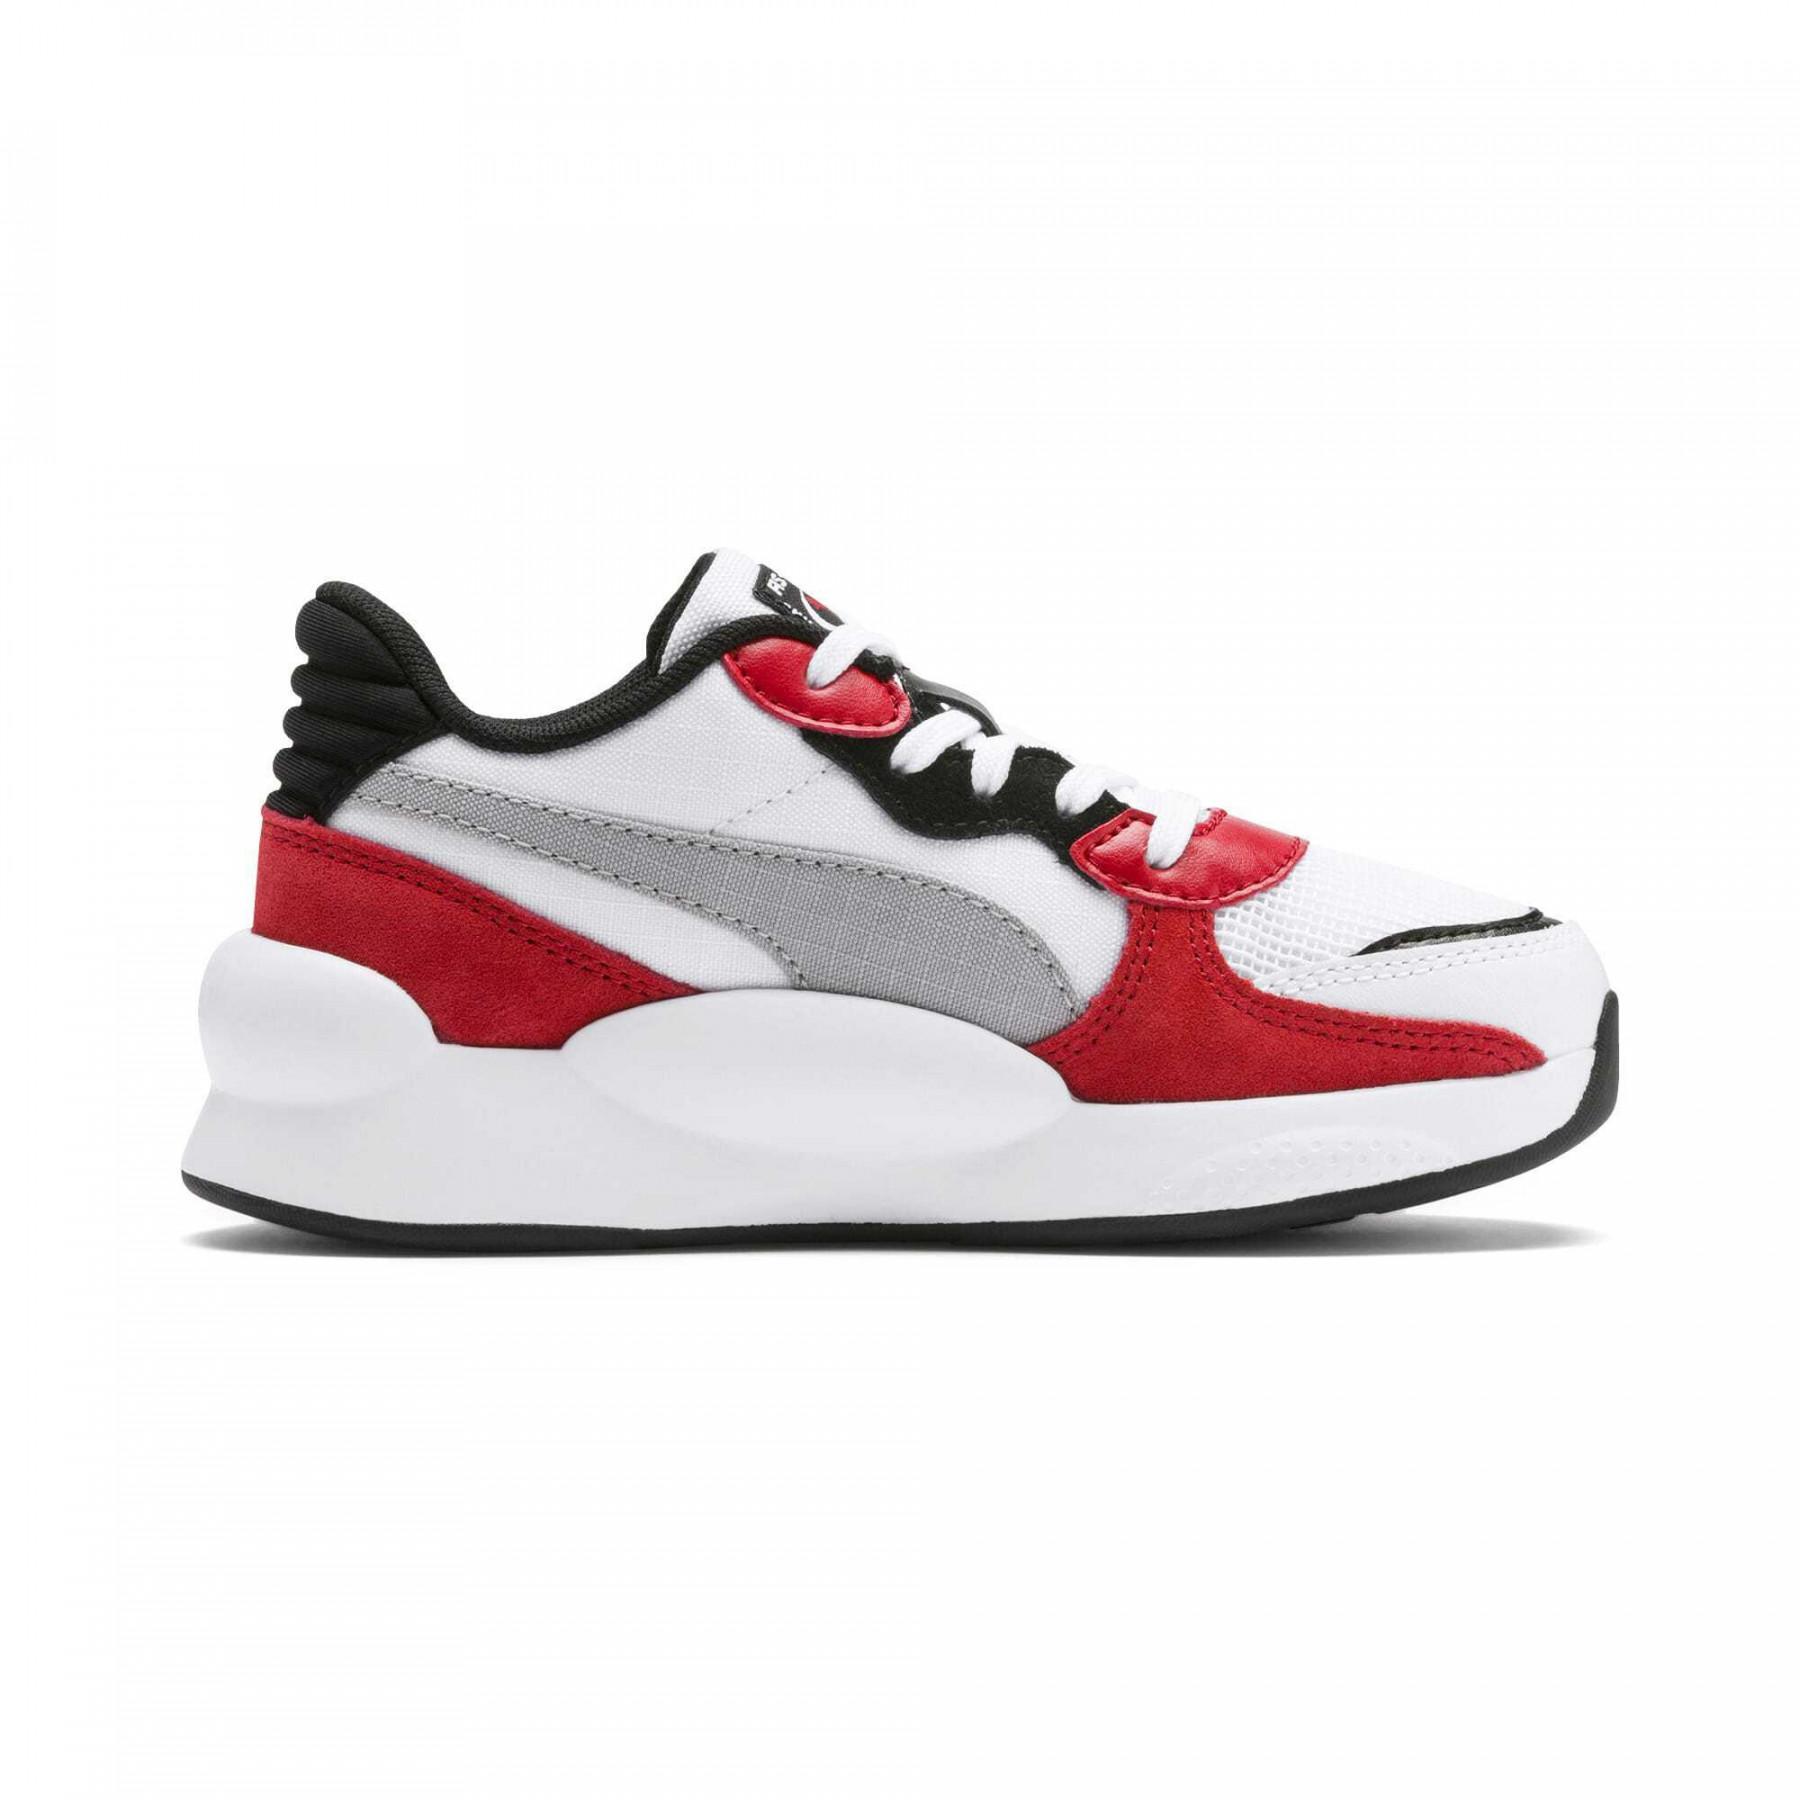 Children's sneakers Puma RS 9.8